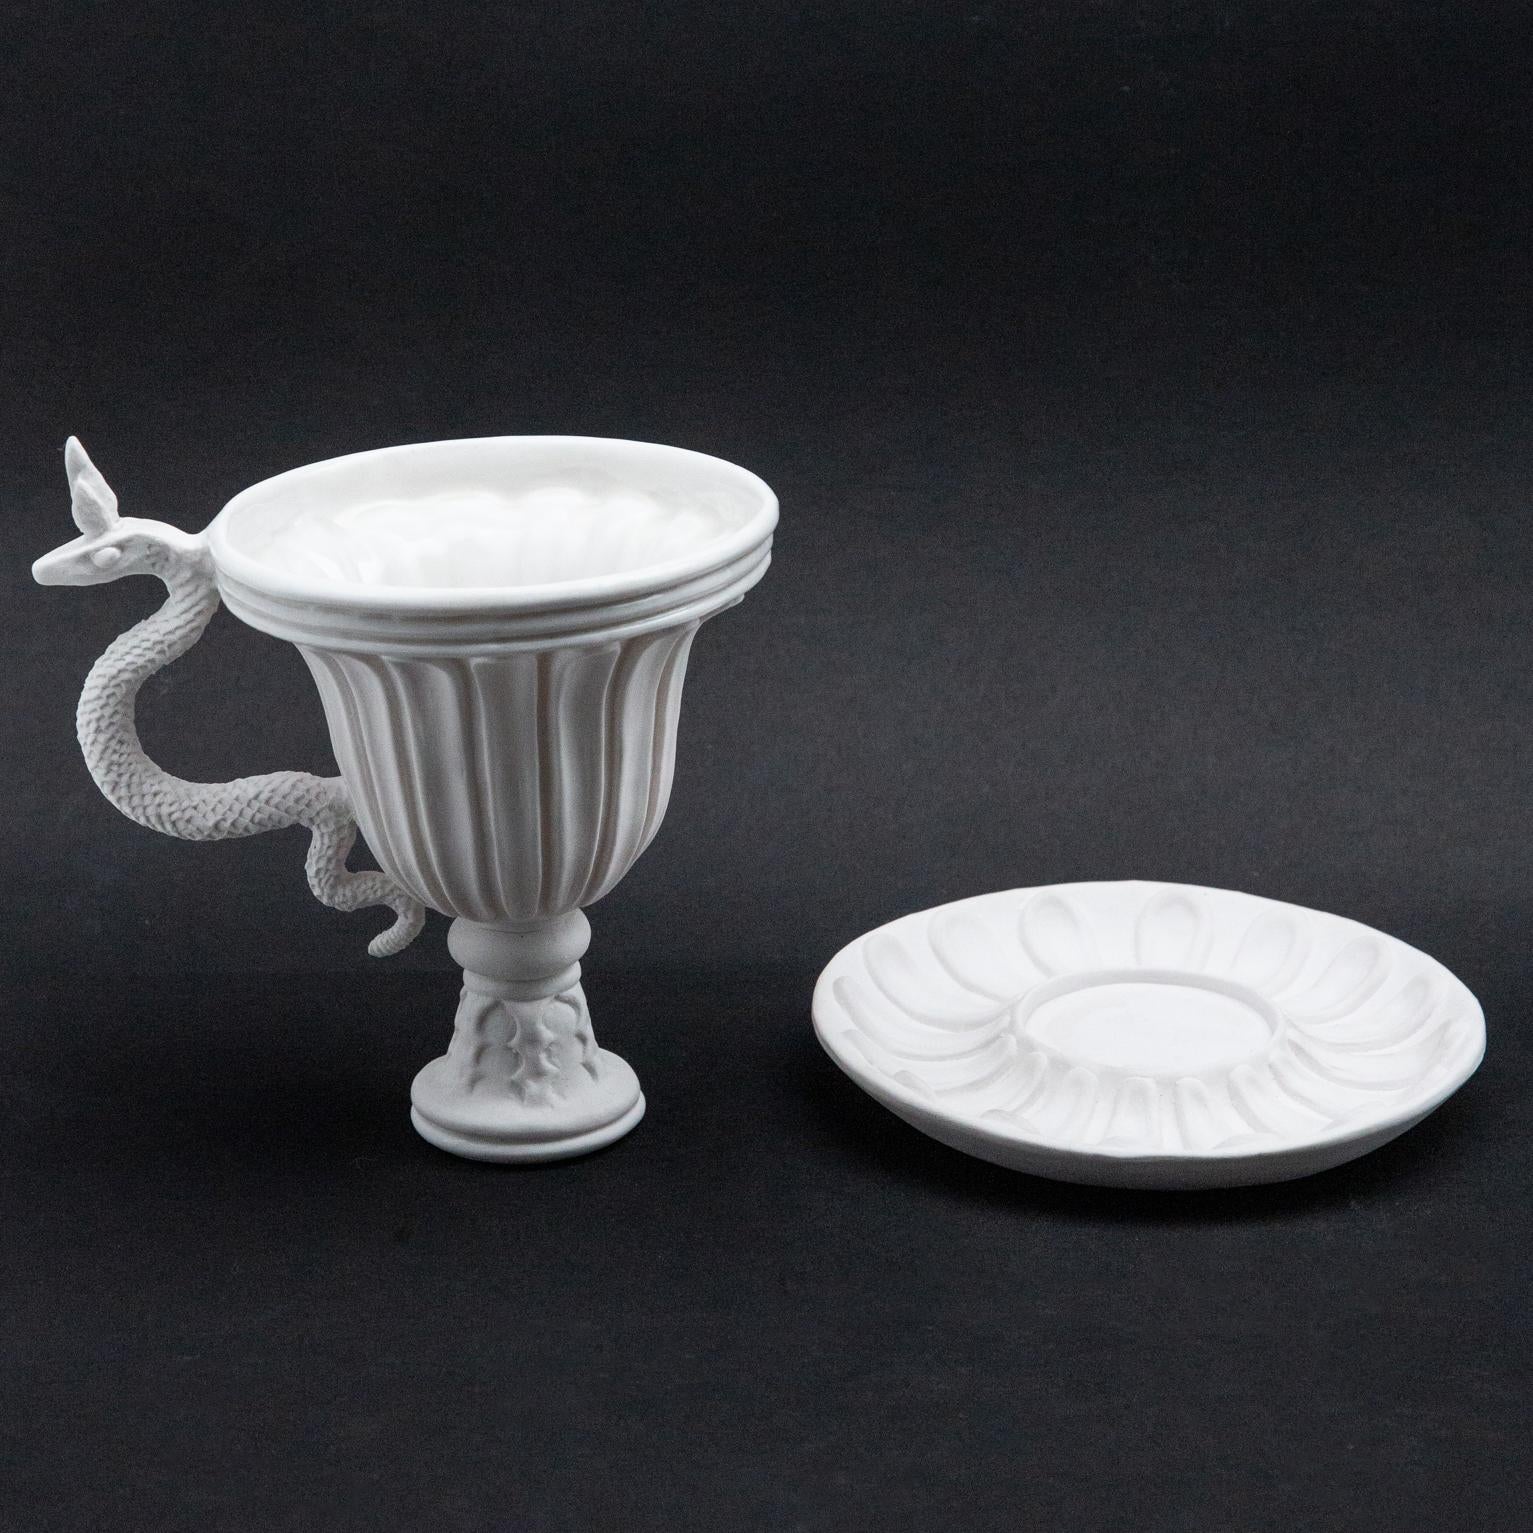 White serpent chalice and saucer, Oriel Harwood. Harwood is a ceramicist and artist who is represented by David Gill galleries and creates fantastic and mystical ceramic objects, furniture, and sculpture. This particular piece is glazed inside the